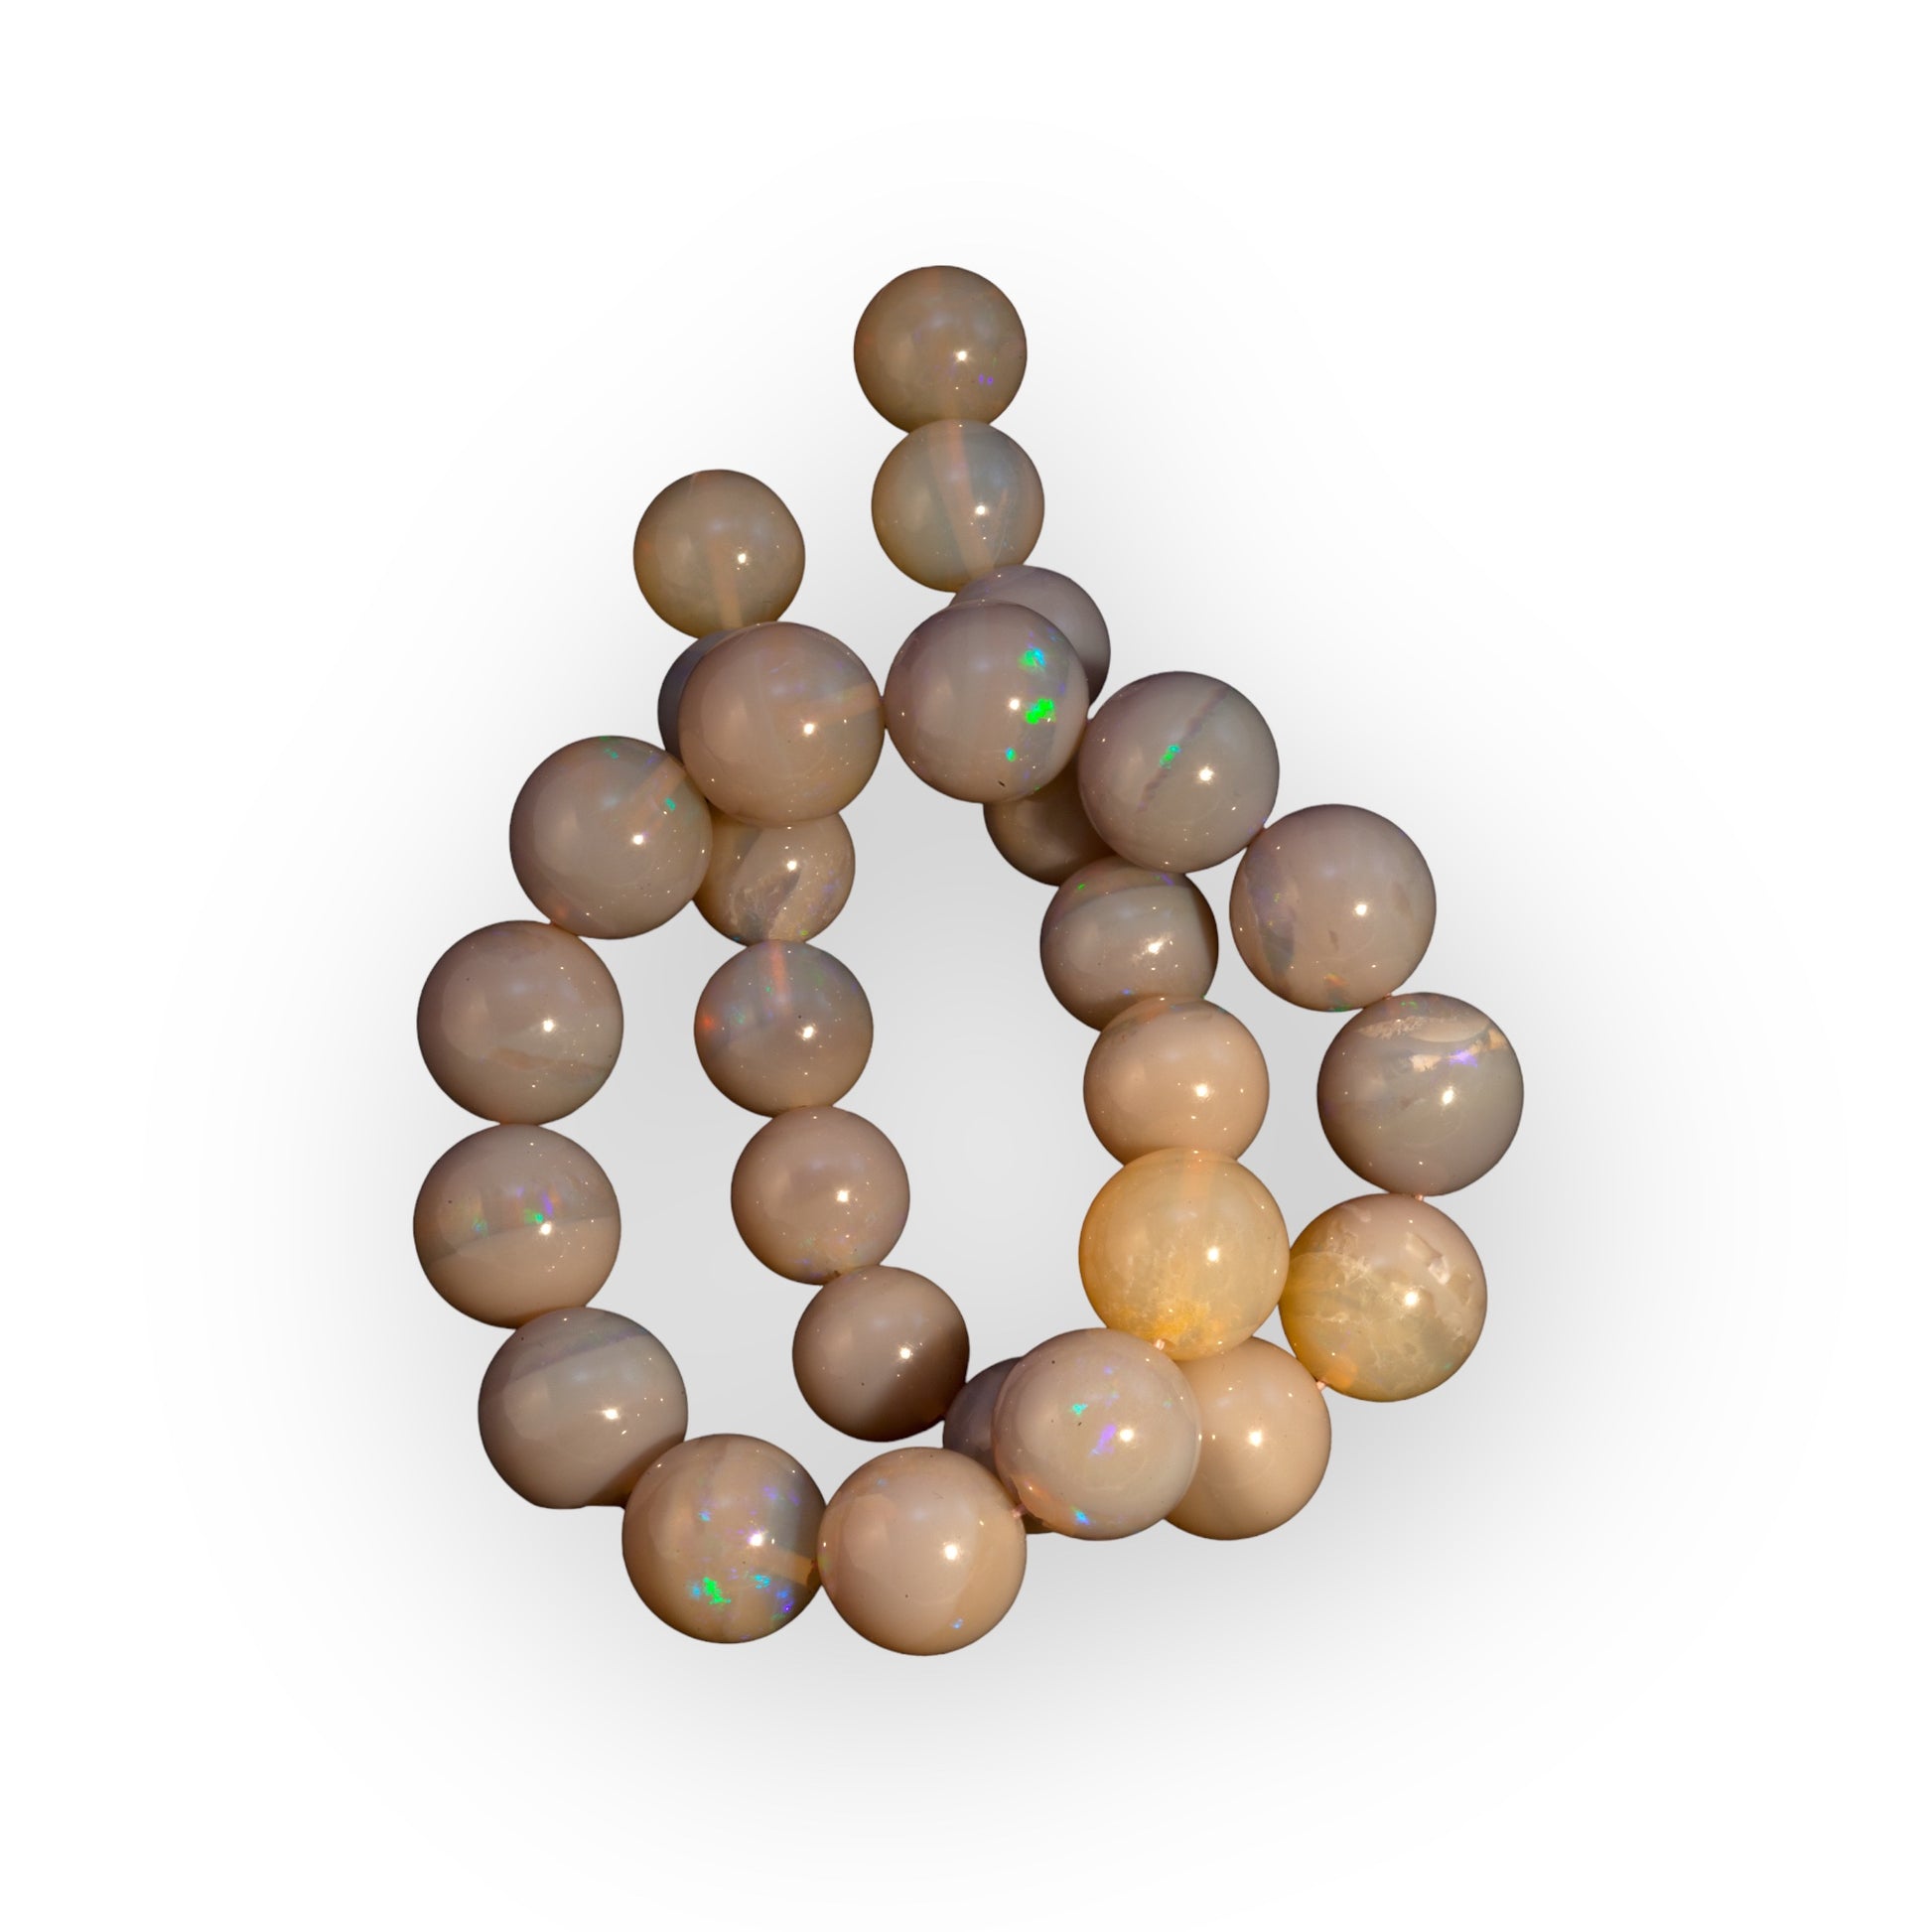 Product No.253 - Coober Pedy Opal Beads - Opal Essence Wholesalers 